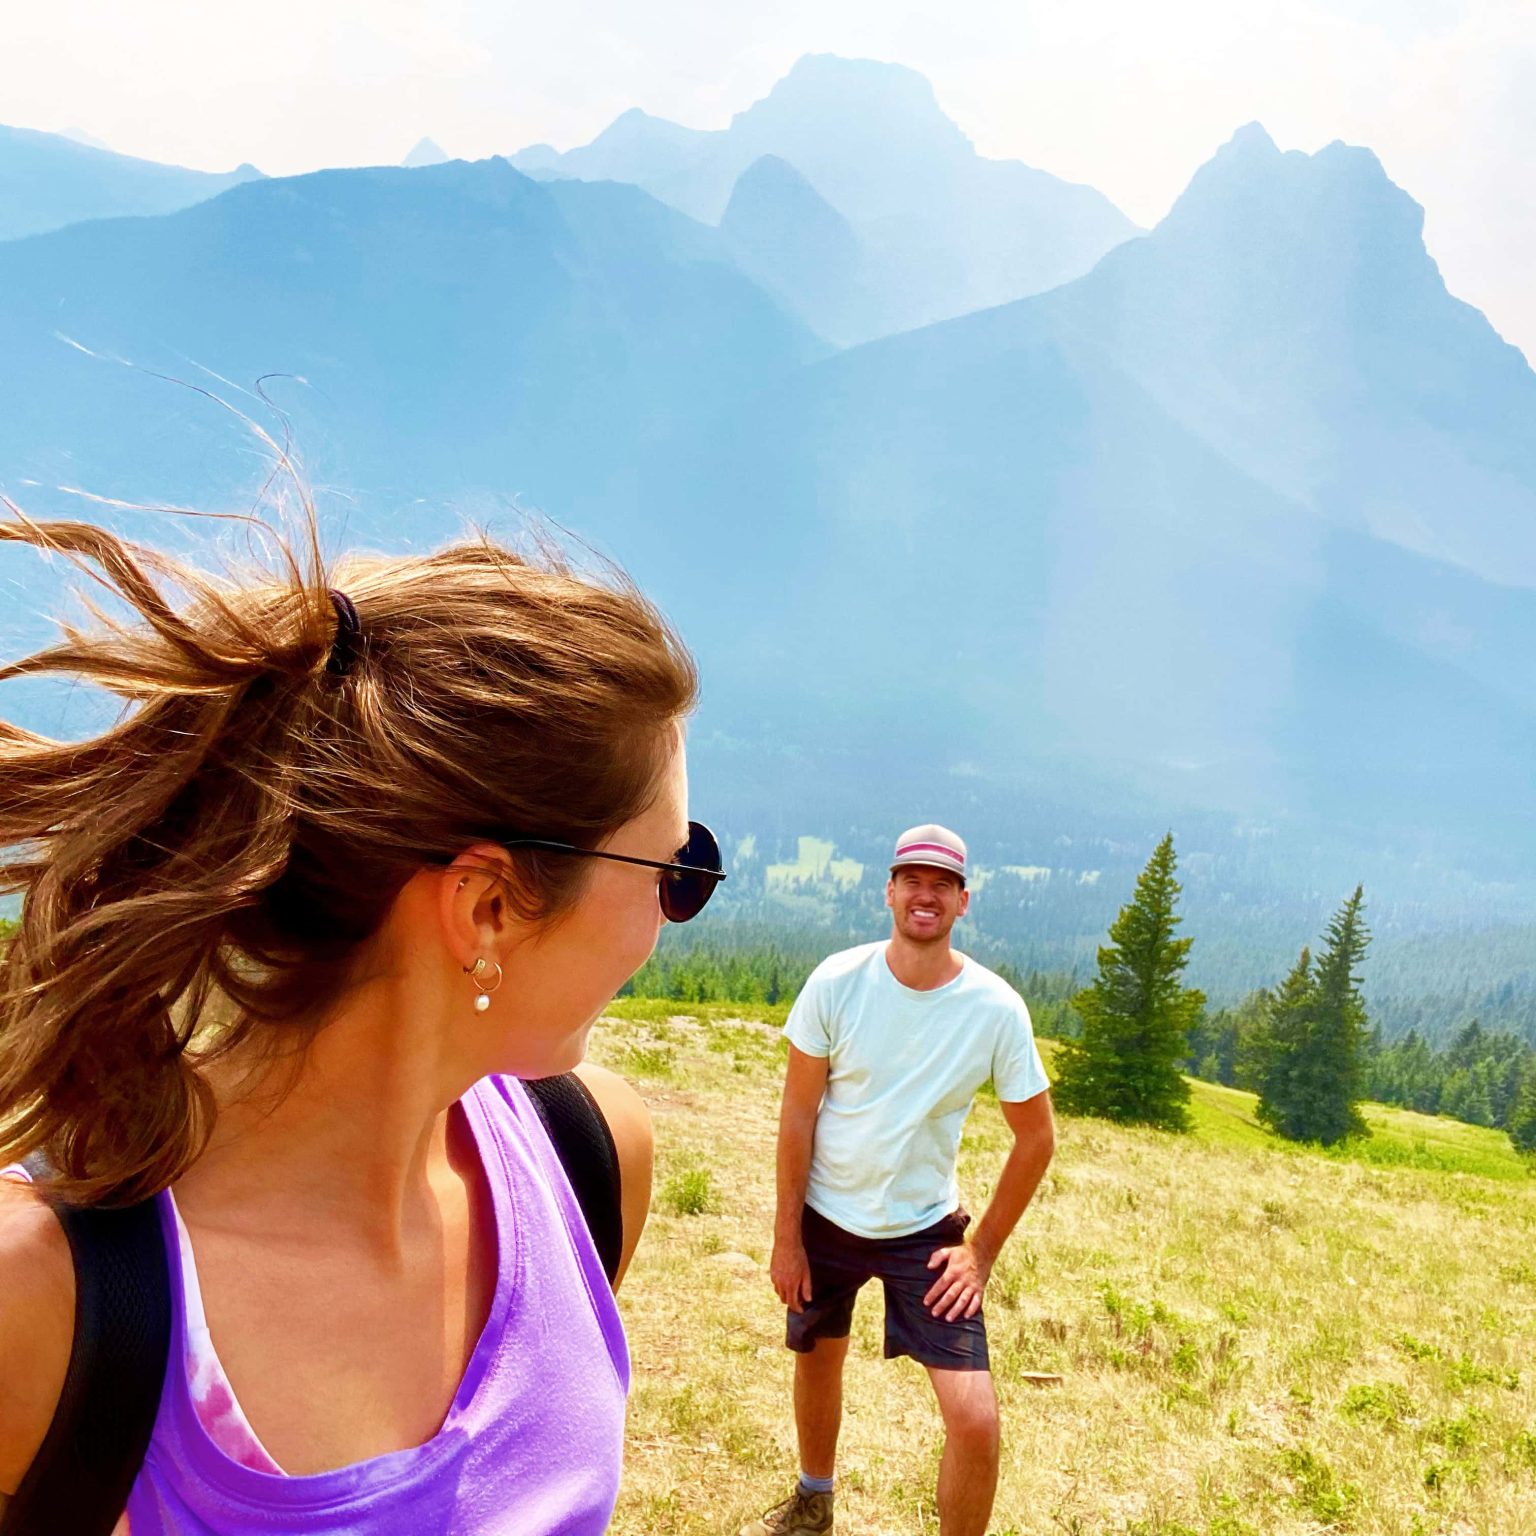 About Us. Mike and Aly hiking in Kananaskis over a green mountainside, Alberta